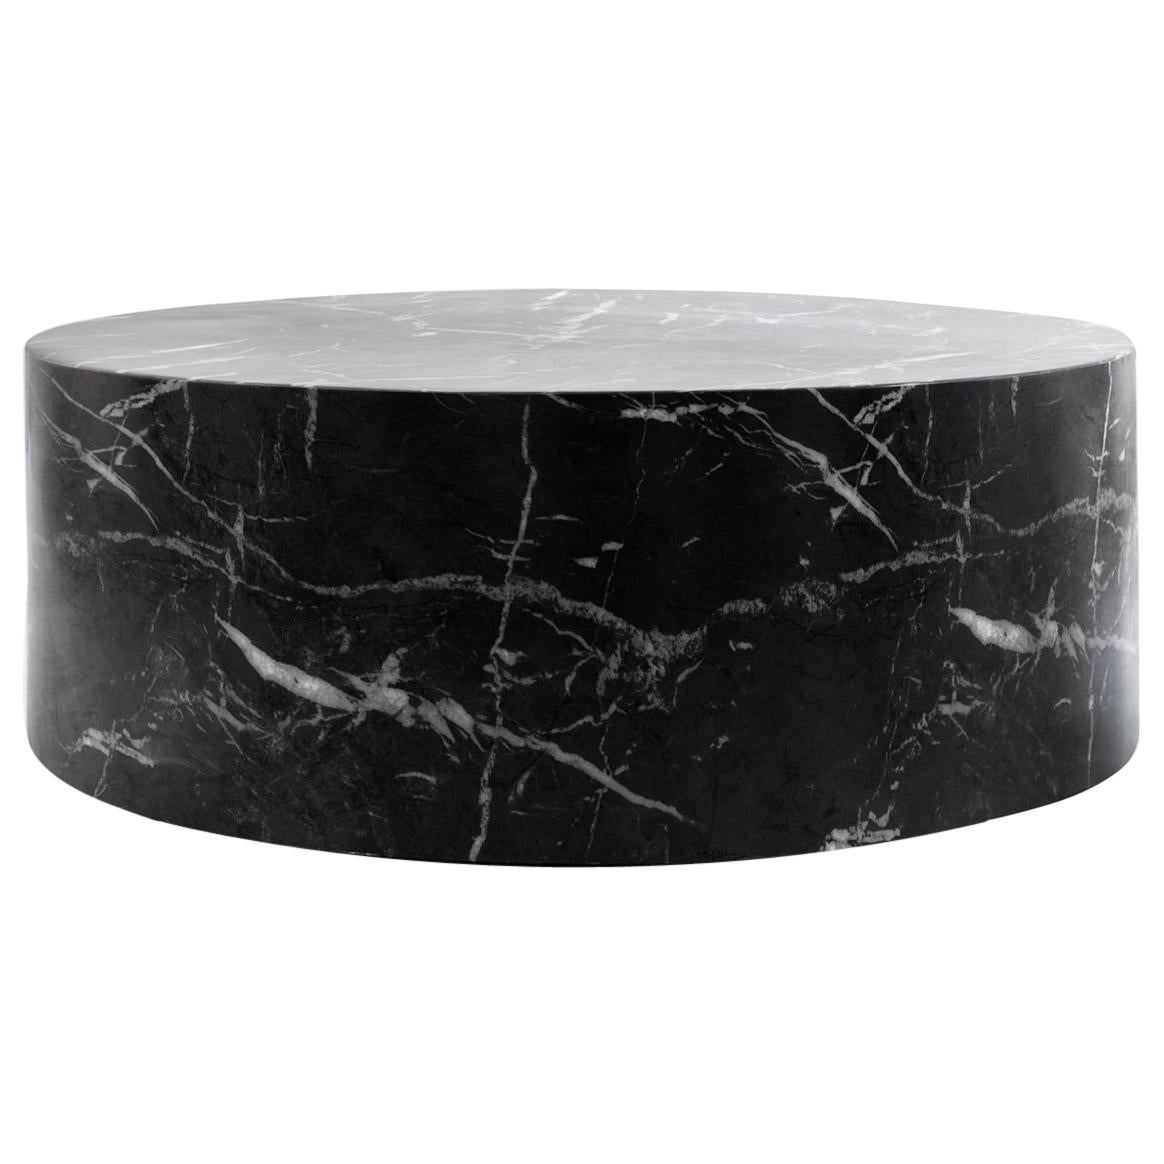 Round Carrera Marble Coffee Table in Black